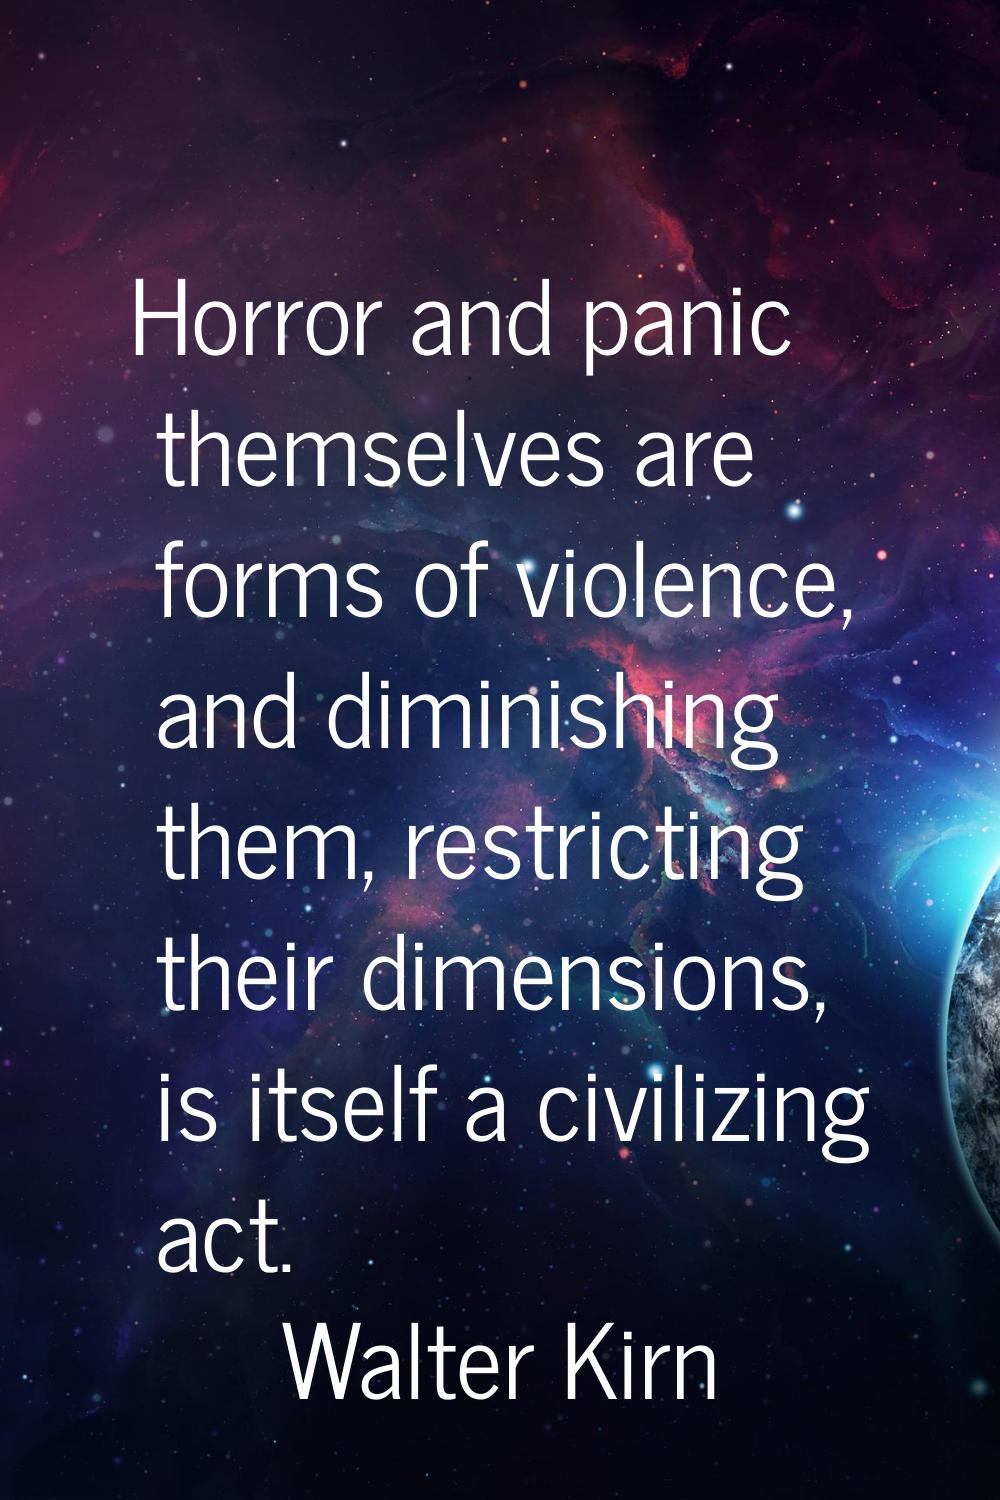 Horror and panic themselves are forms of violence, and diminishing them, restricting their dimensio